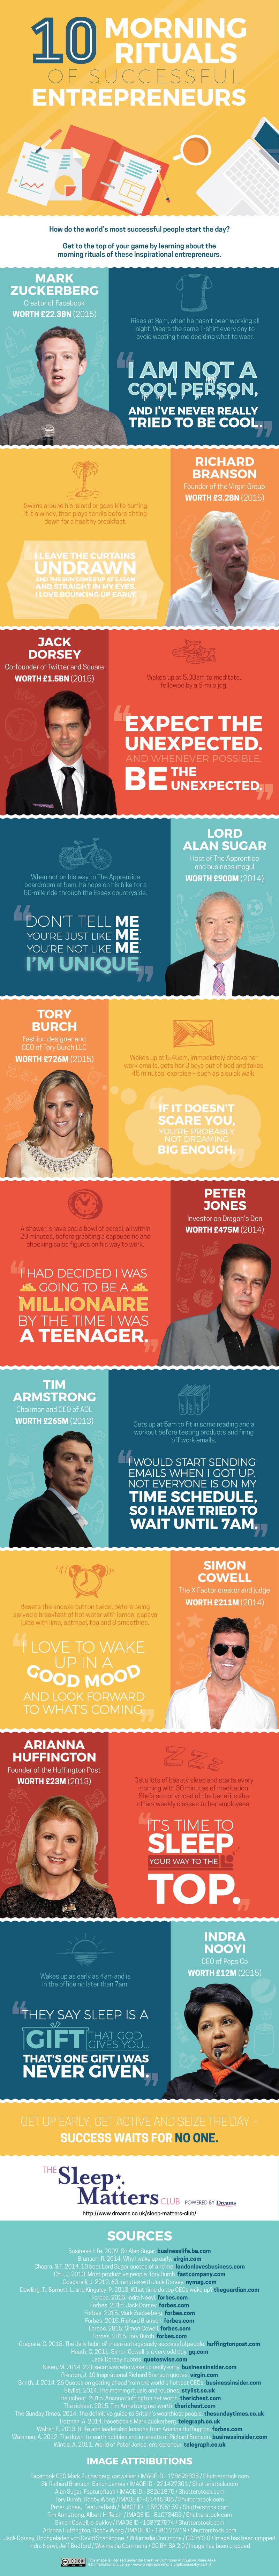 Morning Rituals of Successful Entrepreneurs Infographic